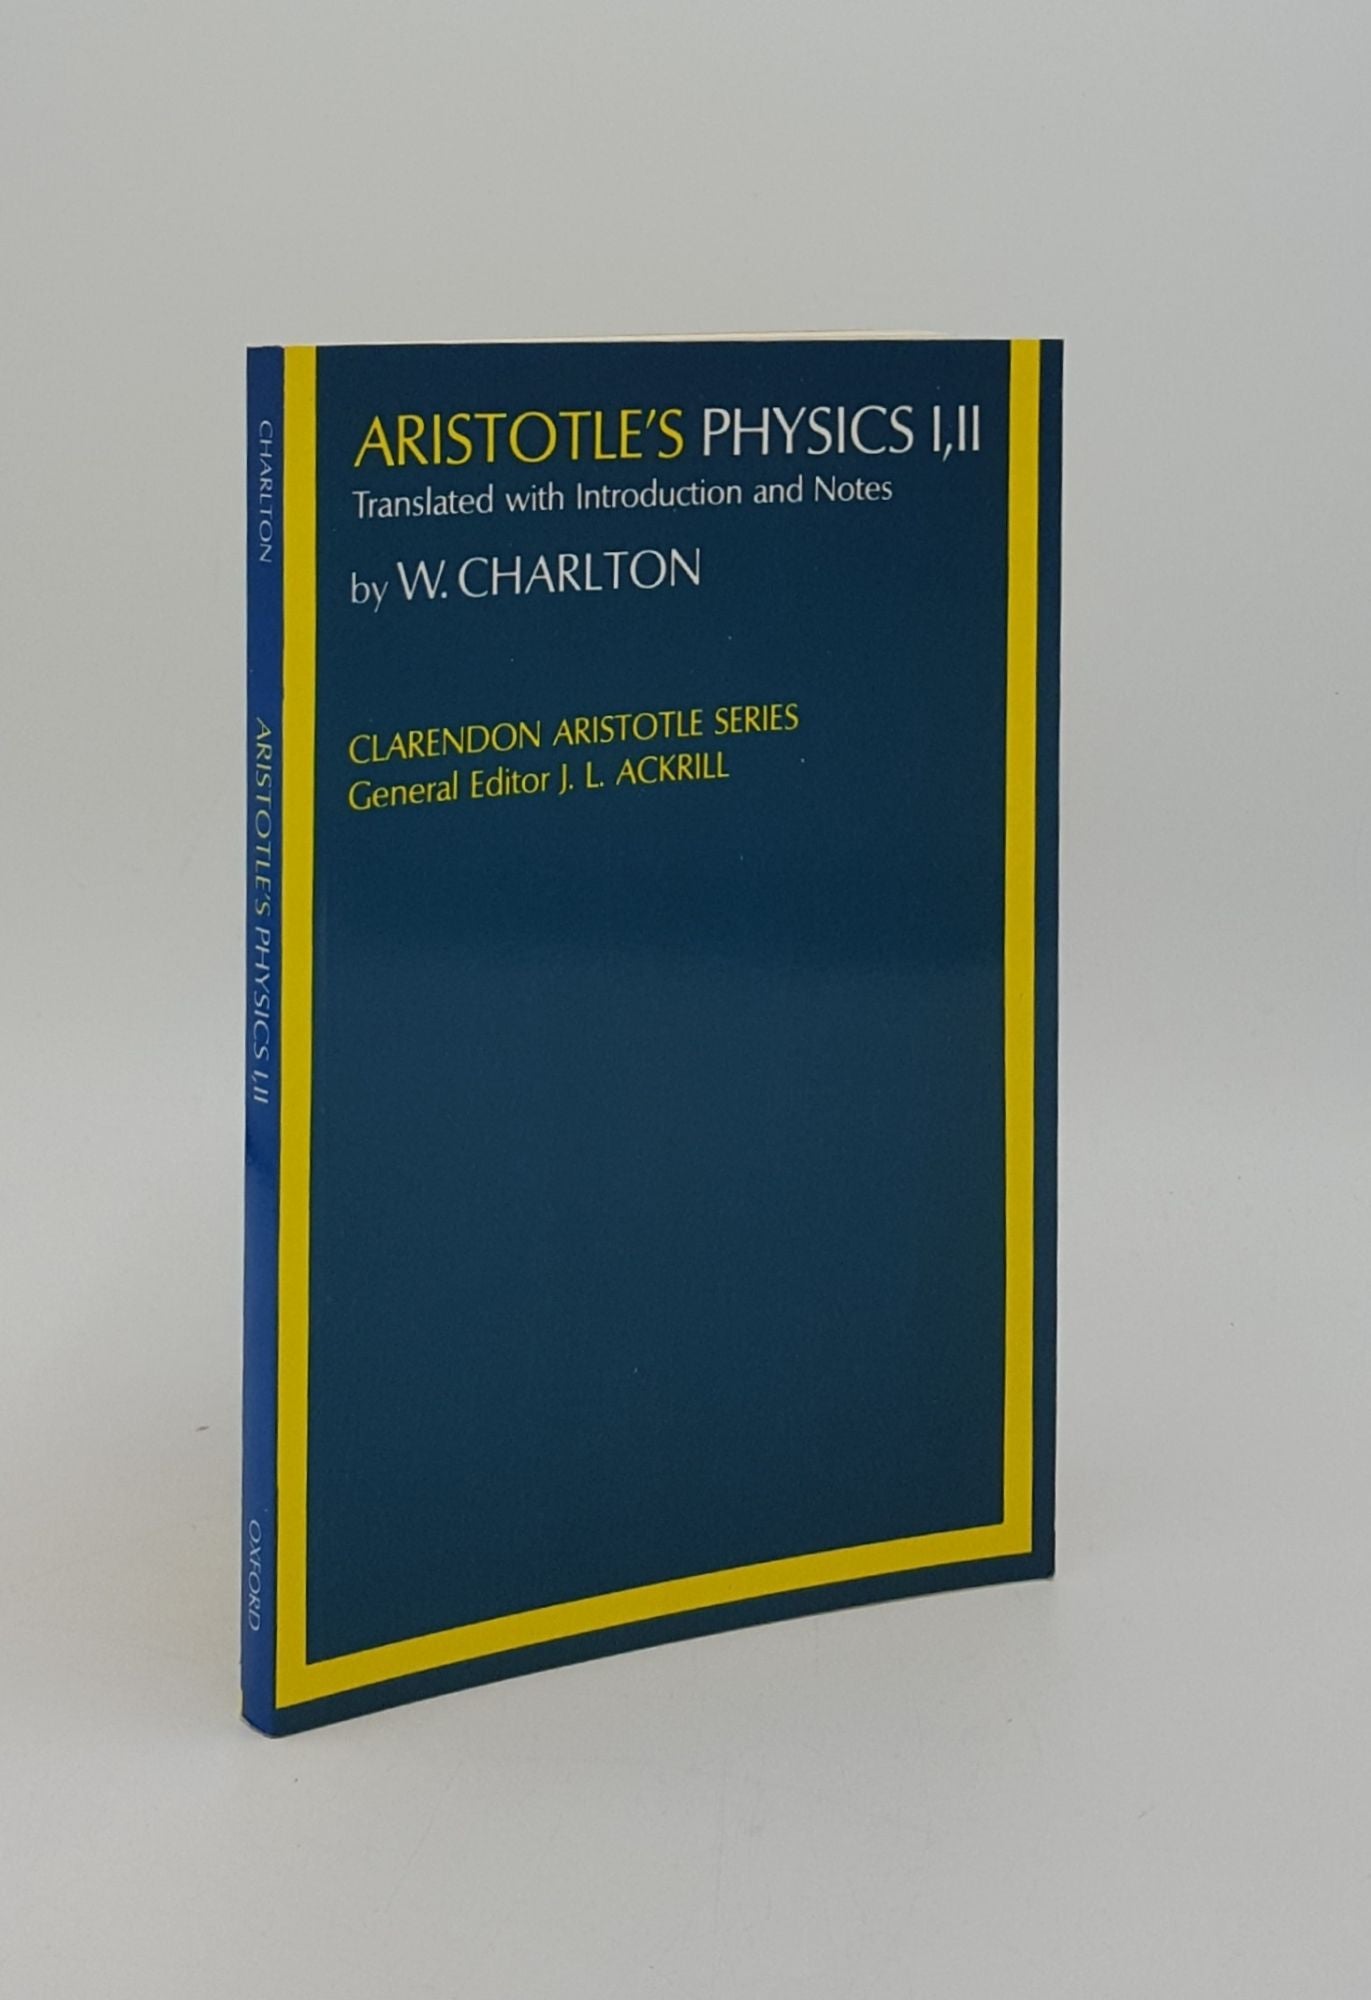 ARISTOTLE, CHARLTON W. - Aristotle Physics Books I and II Translated with Introduction and Notes